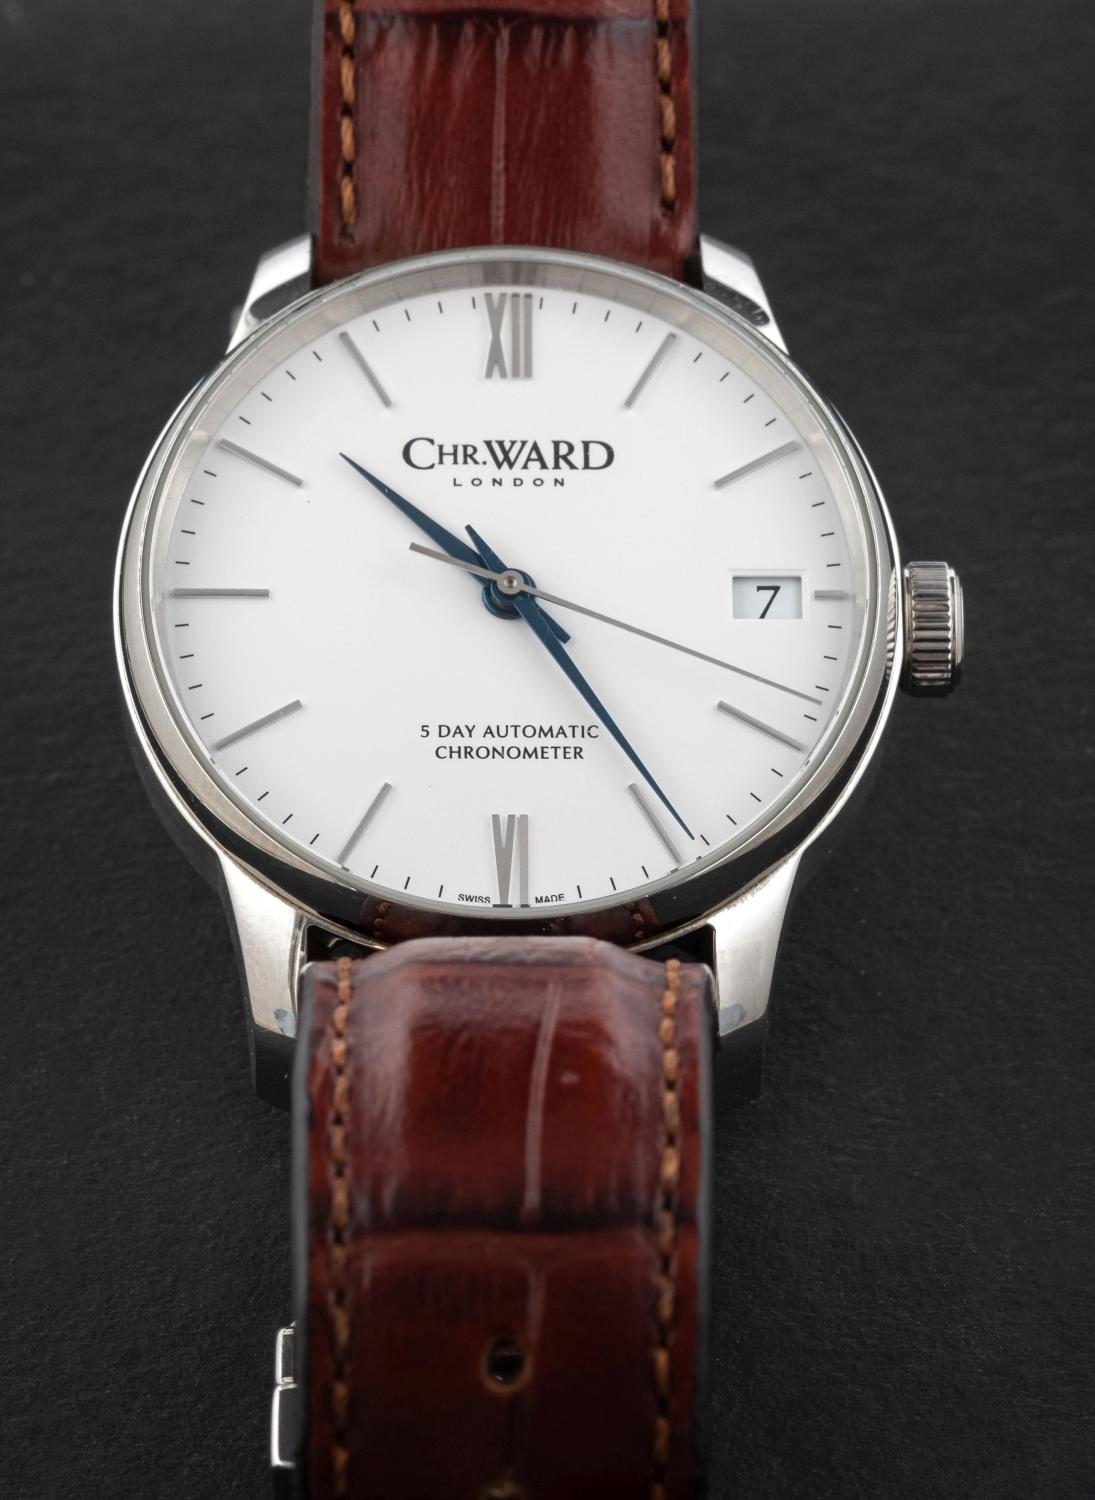 Christopher Ward stainless steel Gentleman's wristwatch the dial with baton numerals, date aperture,